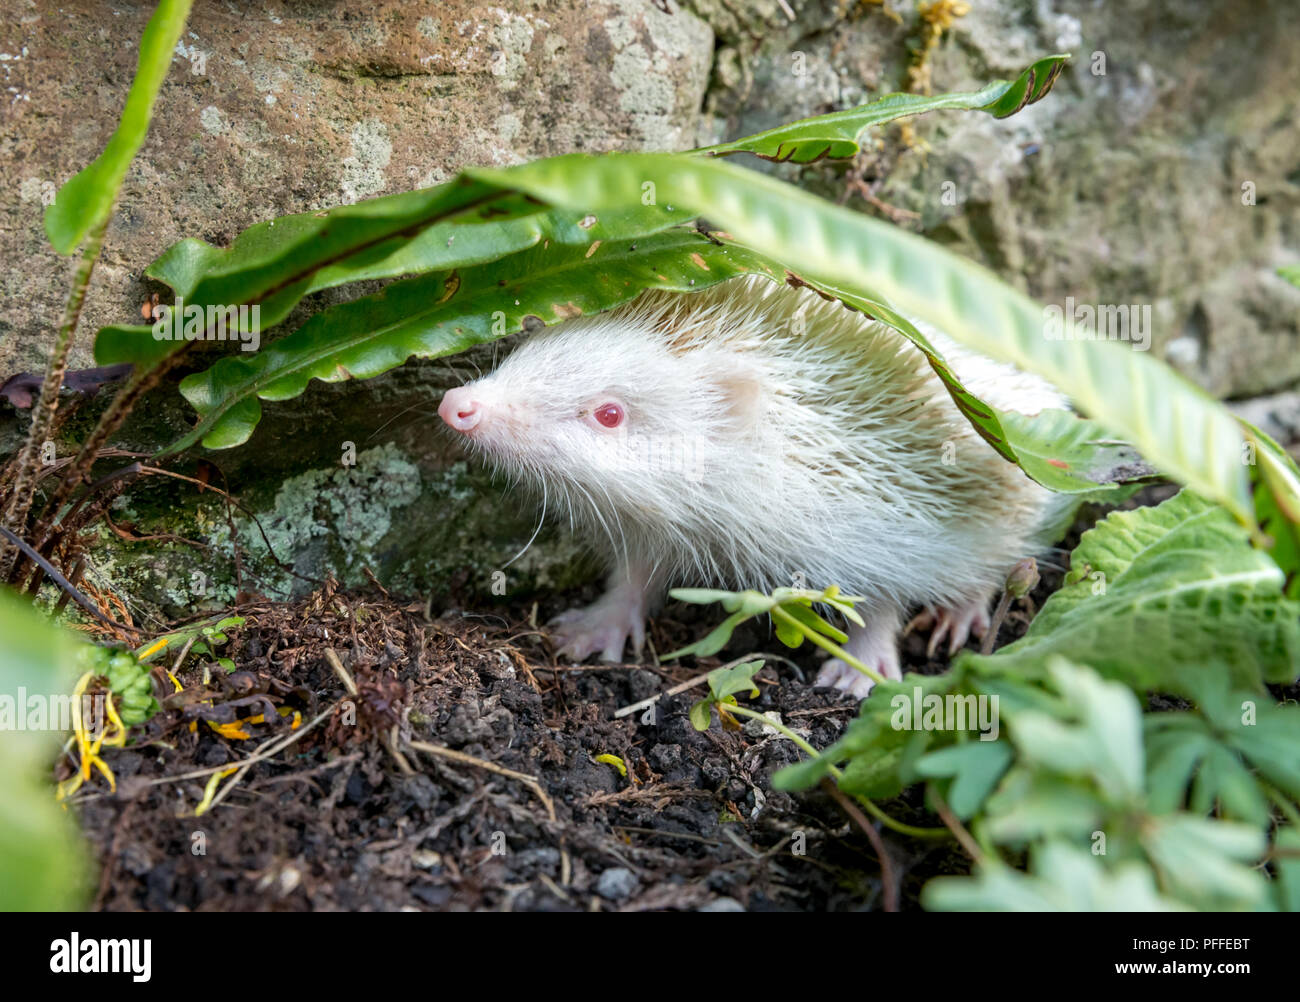 Hedgehog, rare, wild, native, albino hedgehog with white spines and pink nose, ears and paws. Scientific name: Ericaceous europaeus. Landscape. Stock Photo